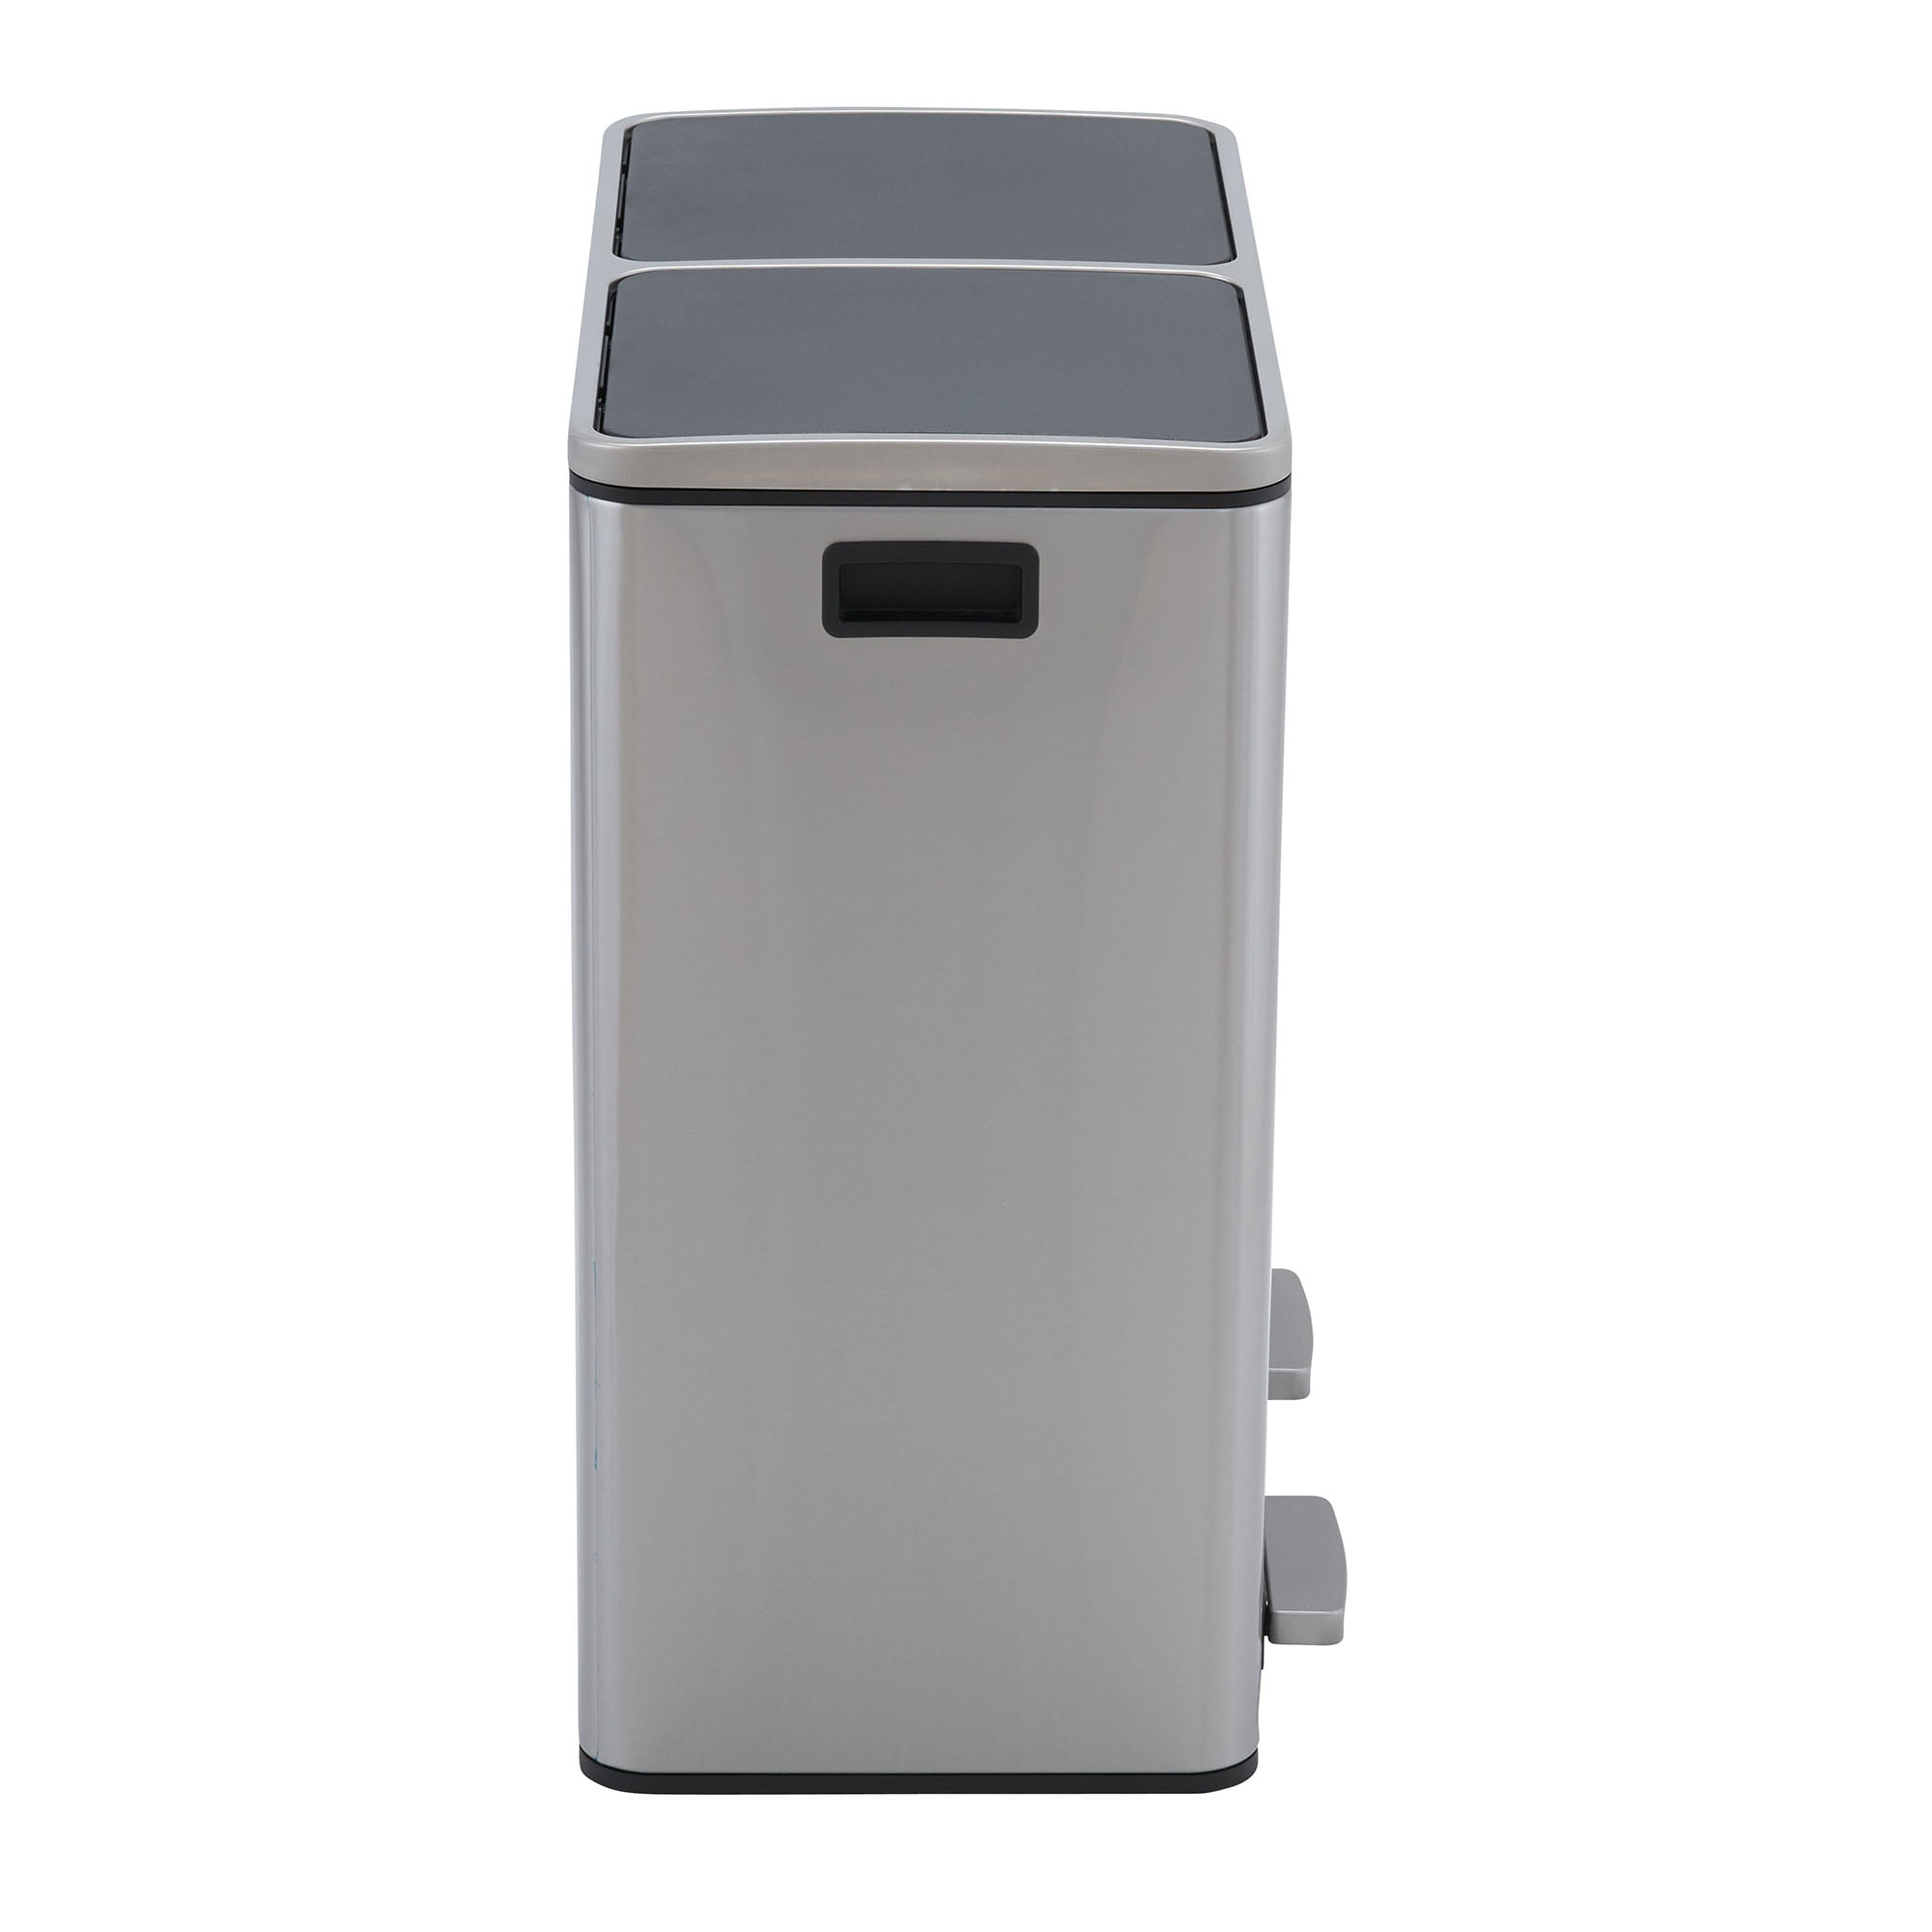 S AFSTAR Kitchen Trash Cans Dual Compartment, 2 x 8 Gal Garbage Can W/2  Deodorizer Compartments, Soft Close Lids & Removable Buckets, Brushed